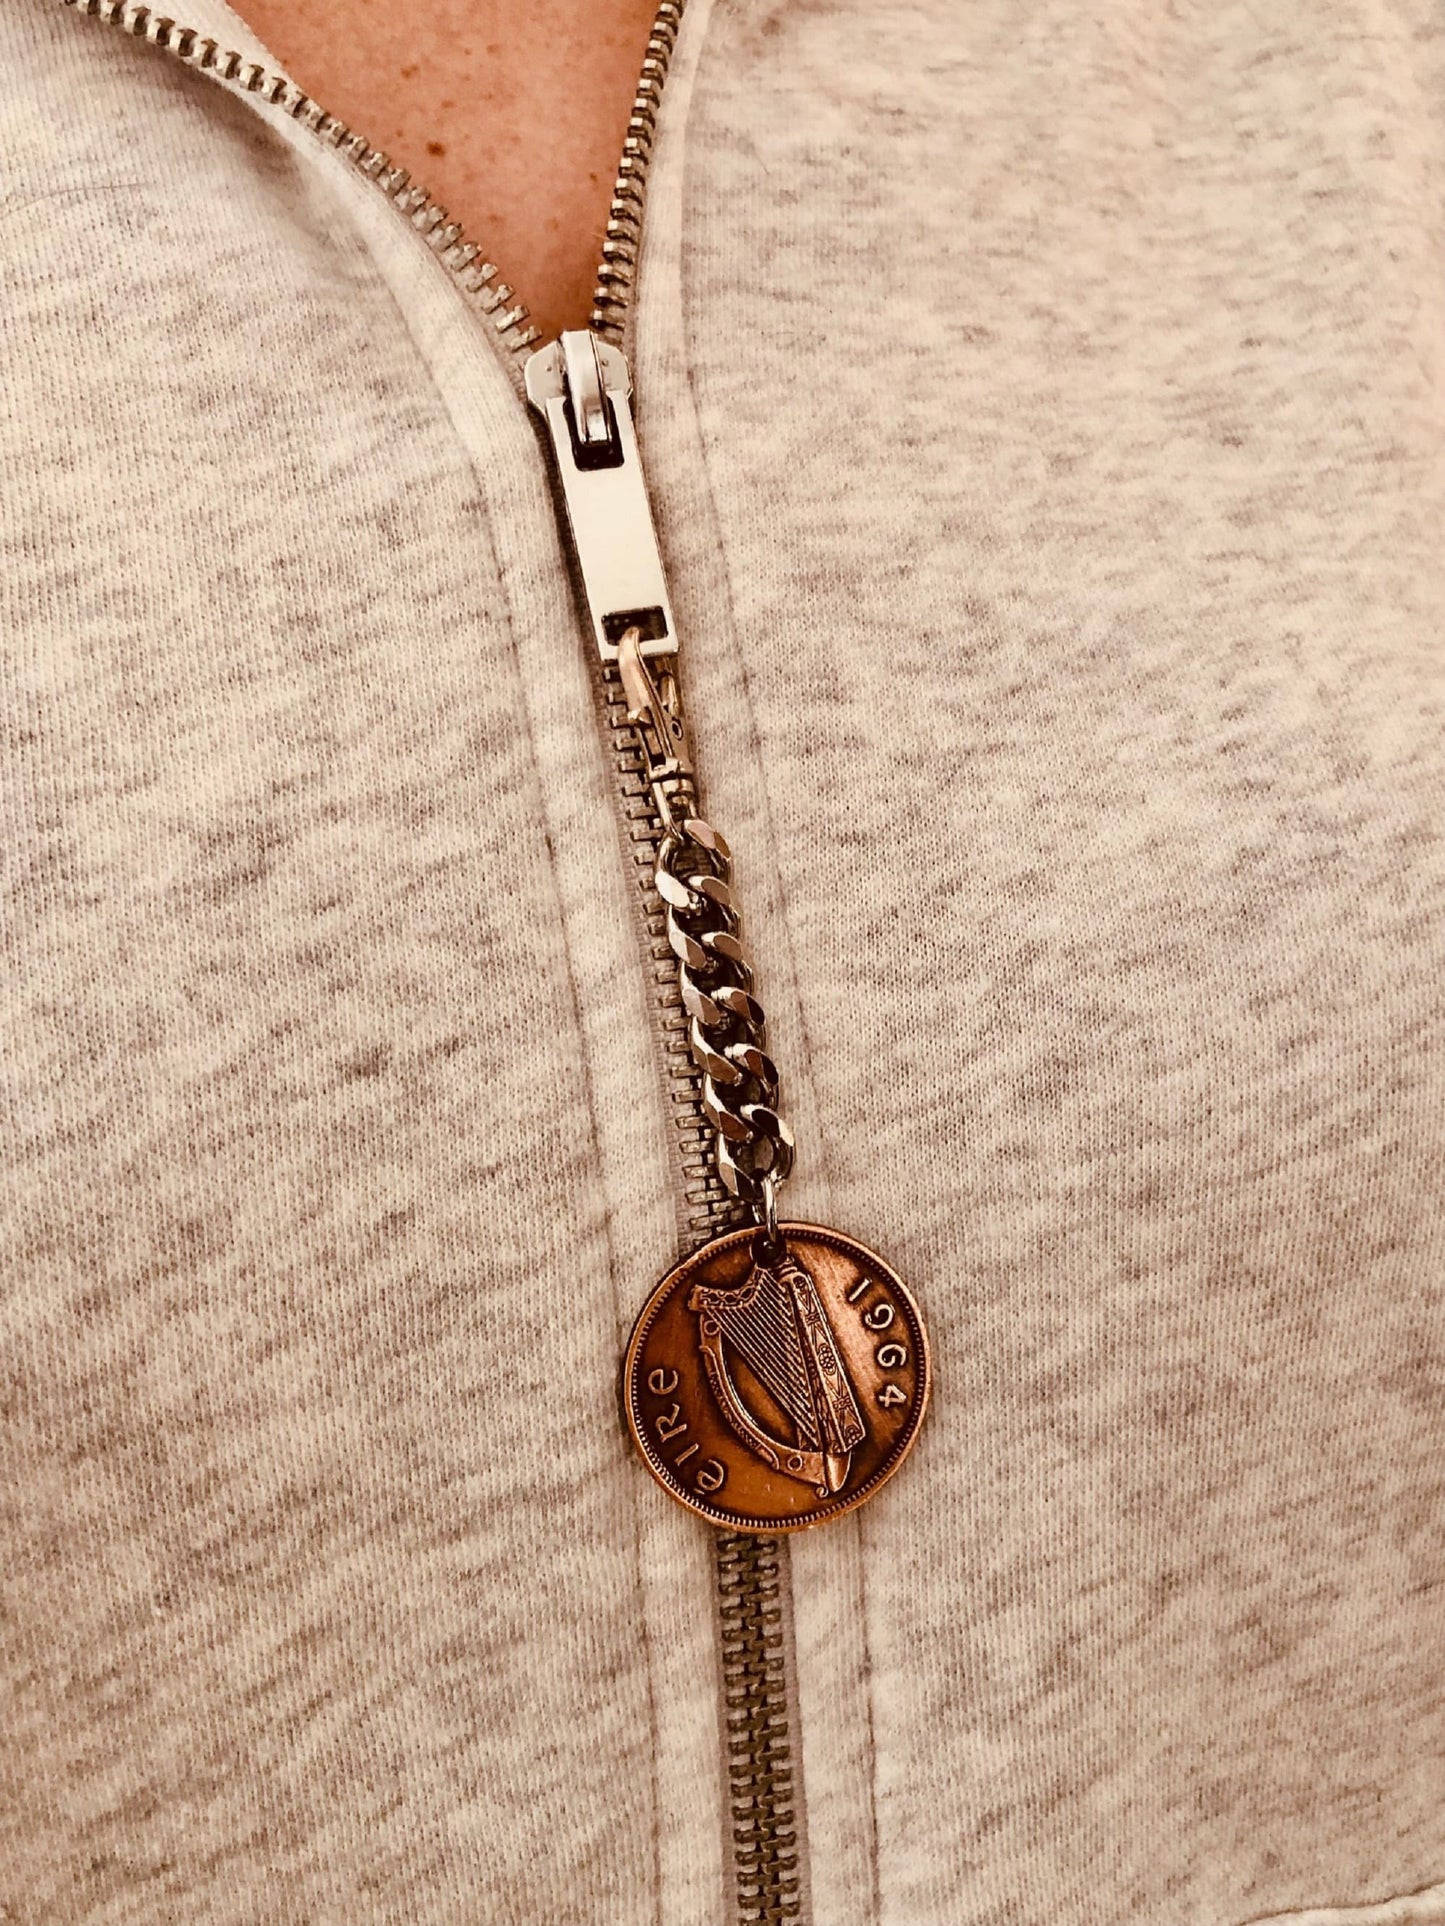 Japan Coin Zipper Pull Japanese Rare, Coin Enthusiast, Jacket, Back Pack, Luggage, Tent, Sleeping Bag, Purse, Clutch